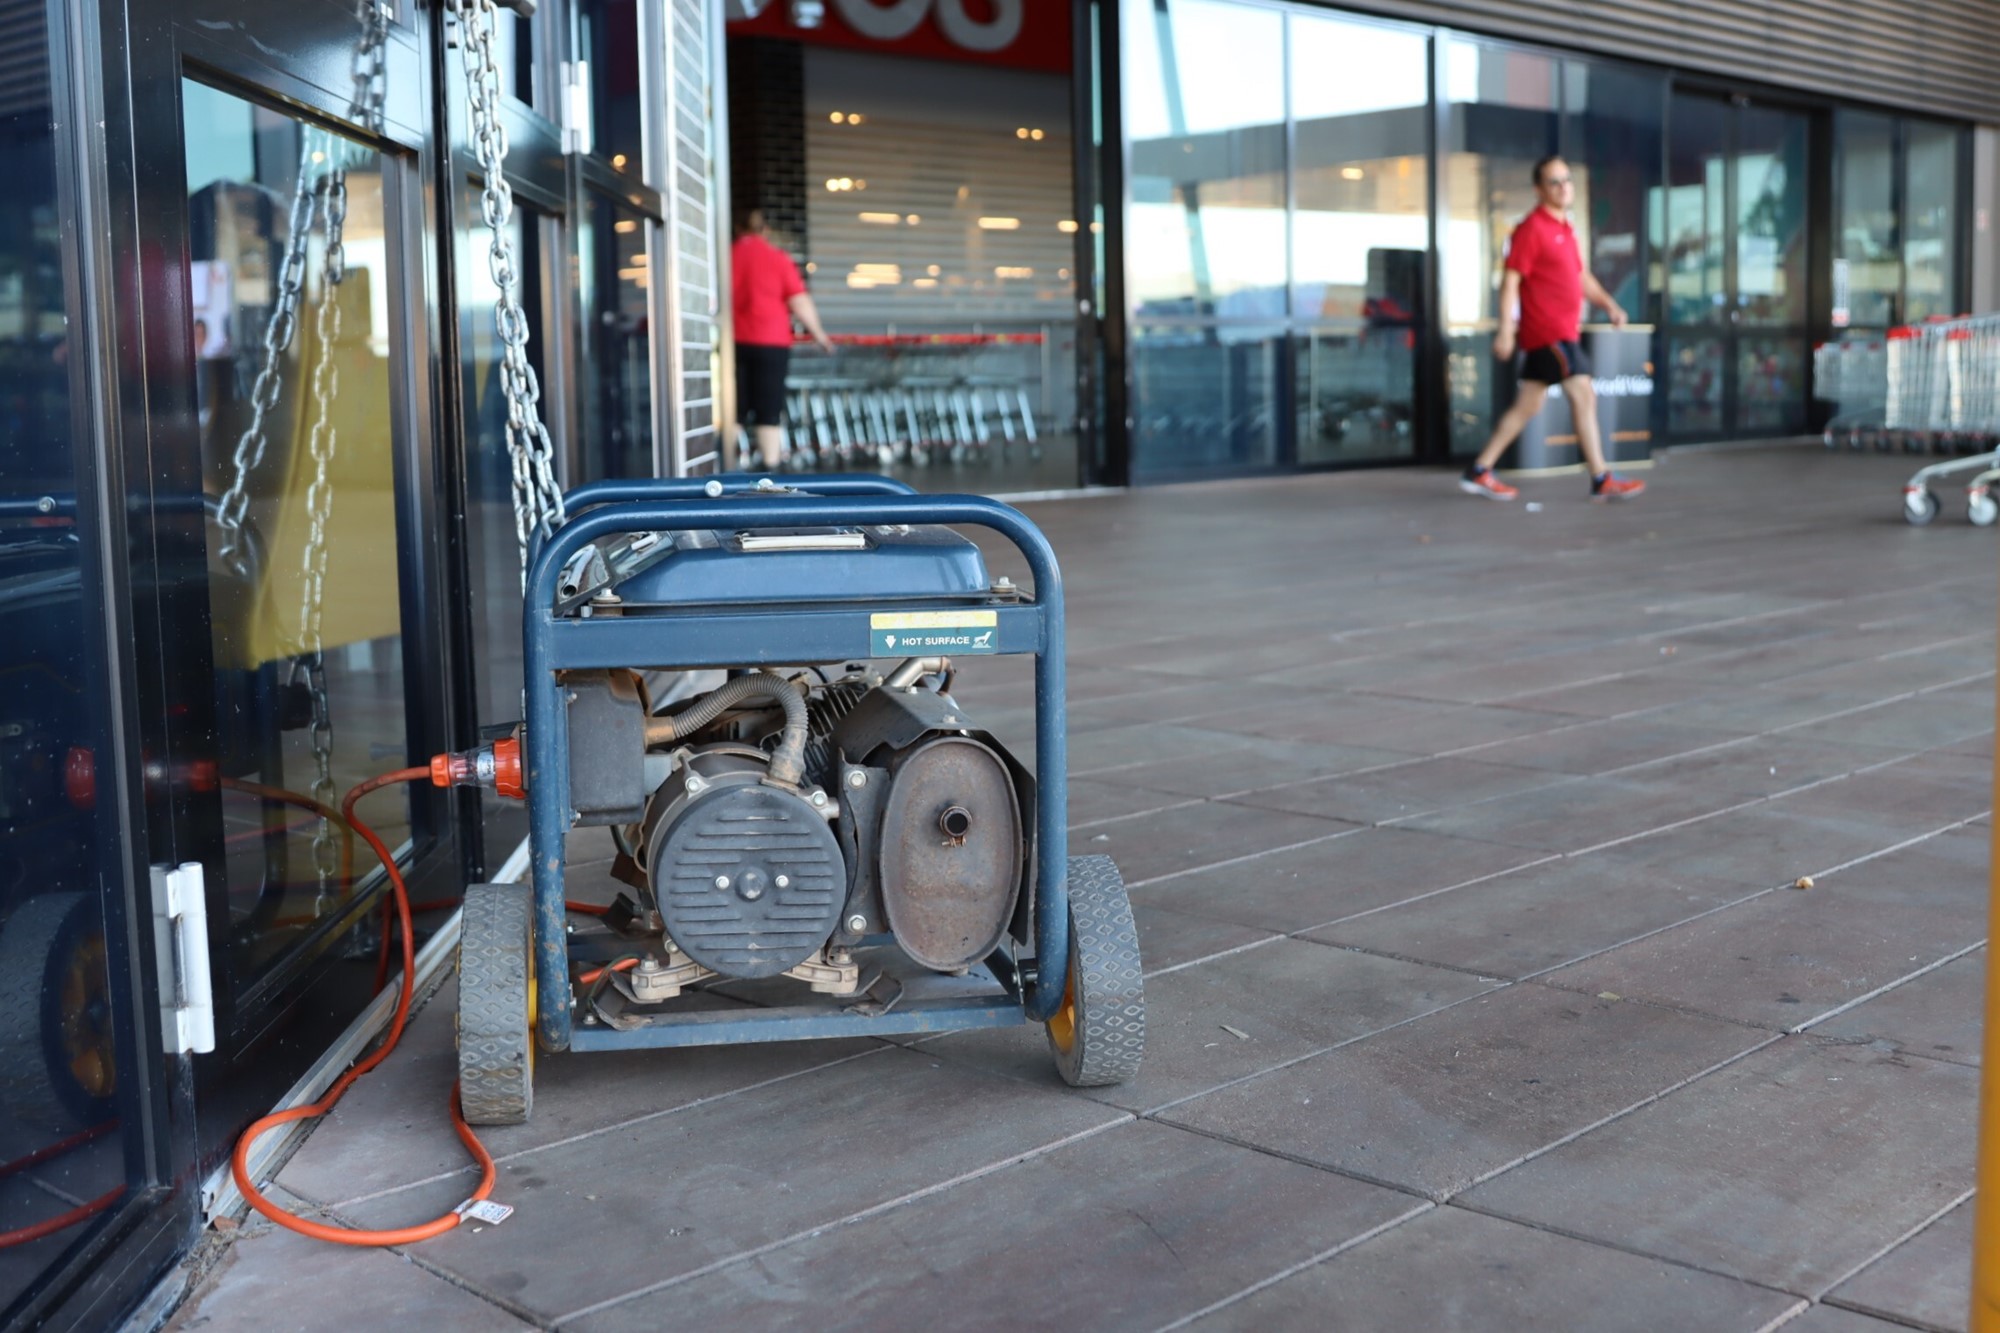 An electricity generator hooked up to a store